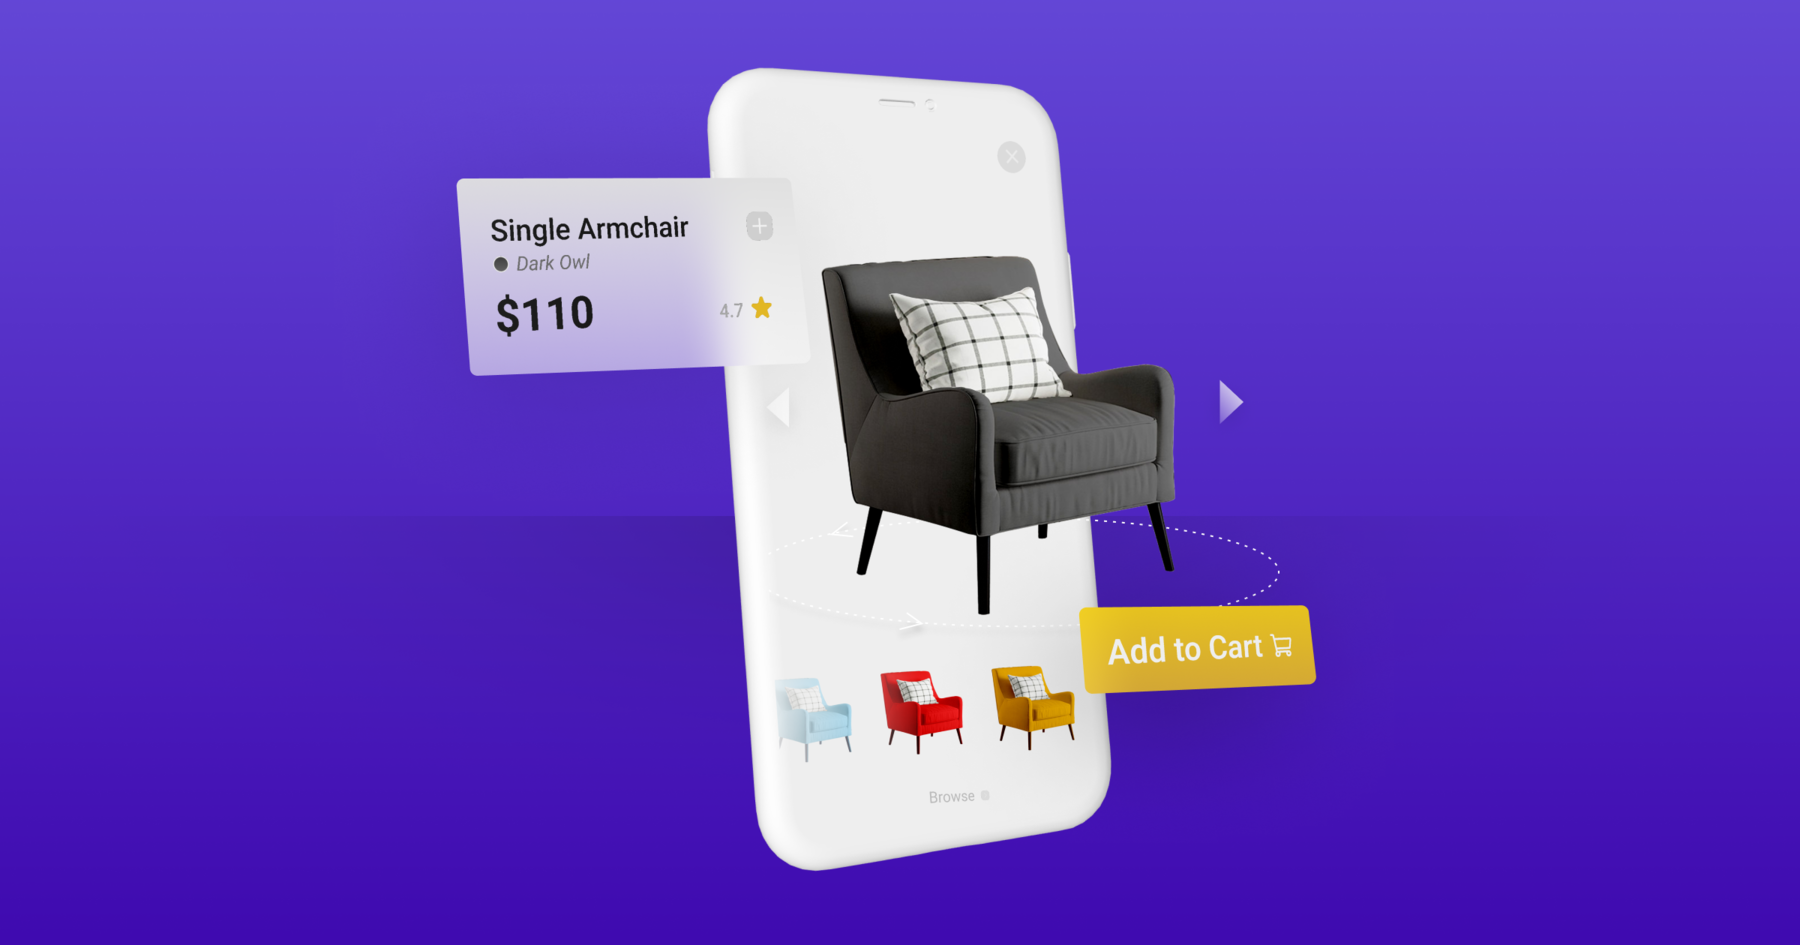 From Novelty To Utility: Augmented Reality & E-Commerce